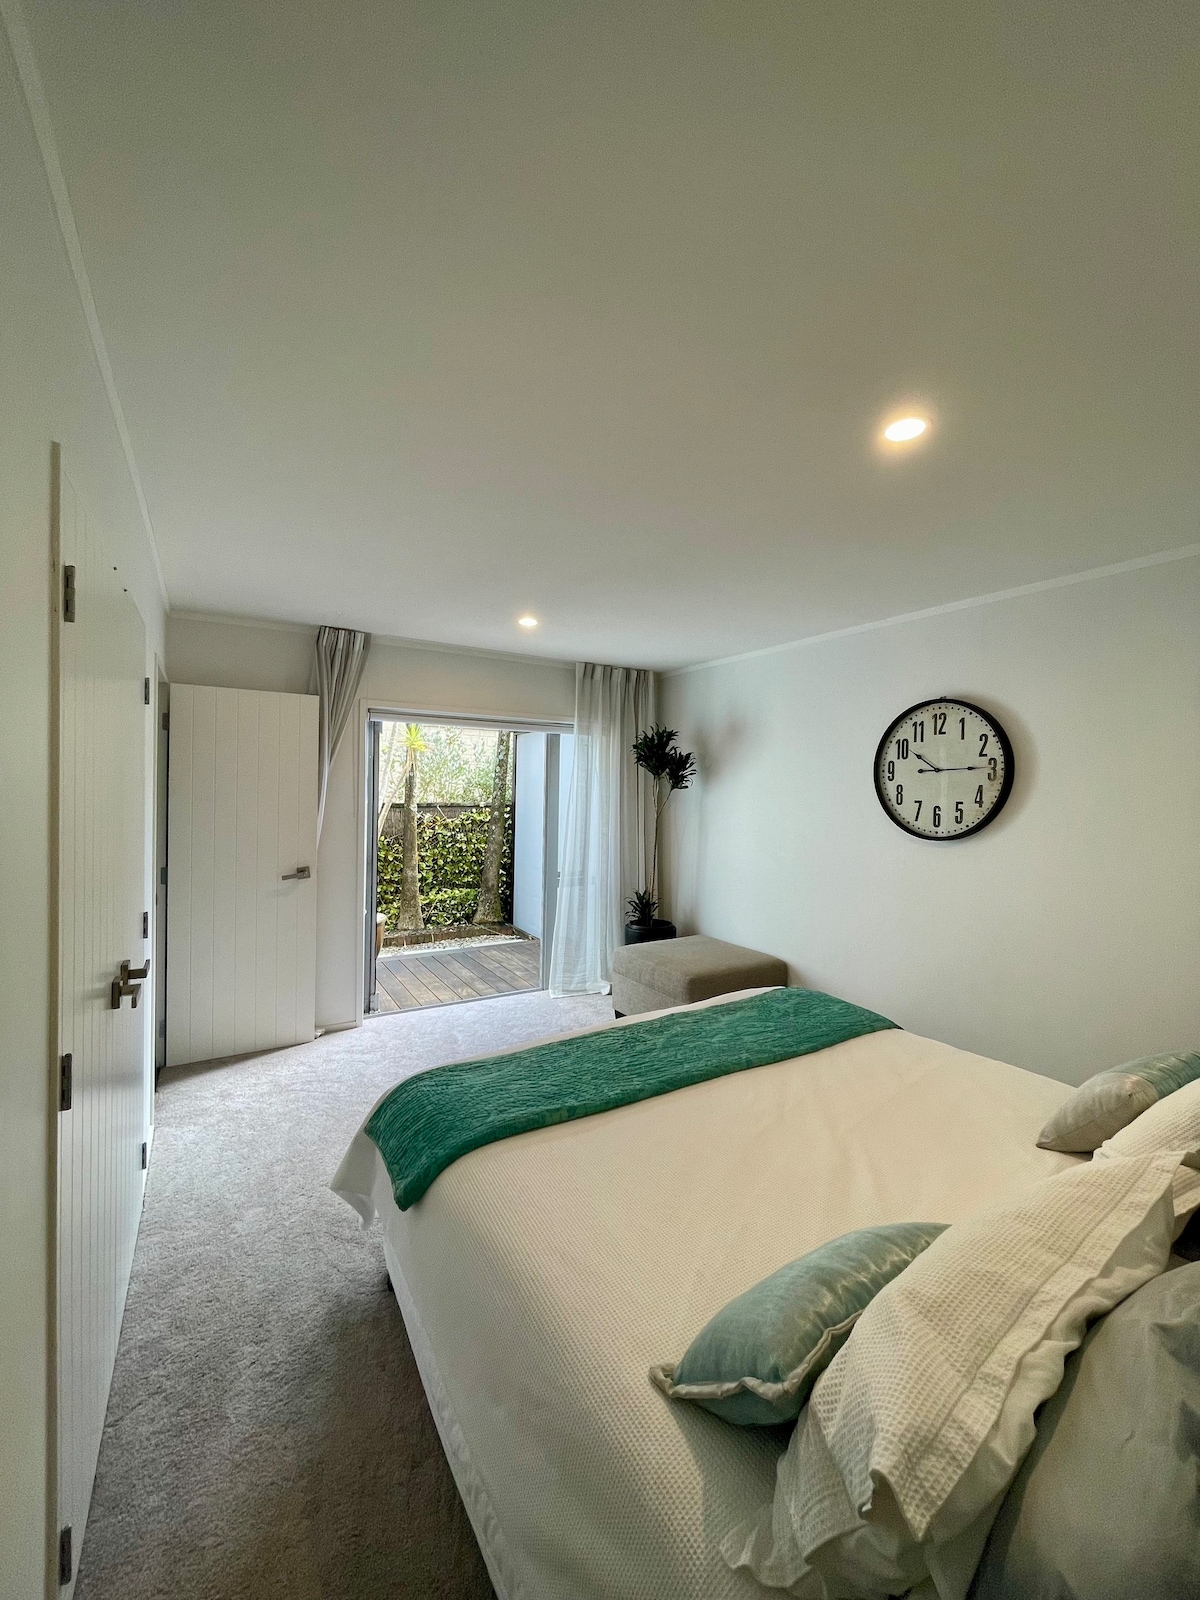 Entire guest suite in Auckland
3 private rooms